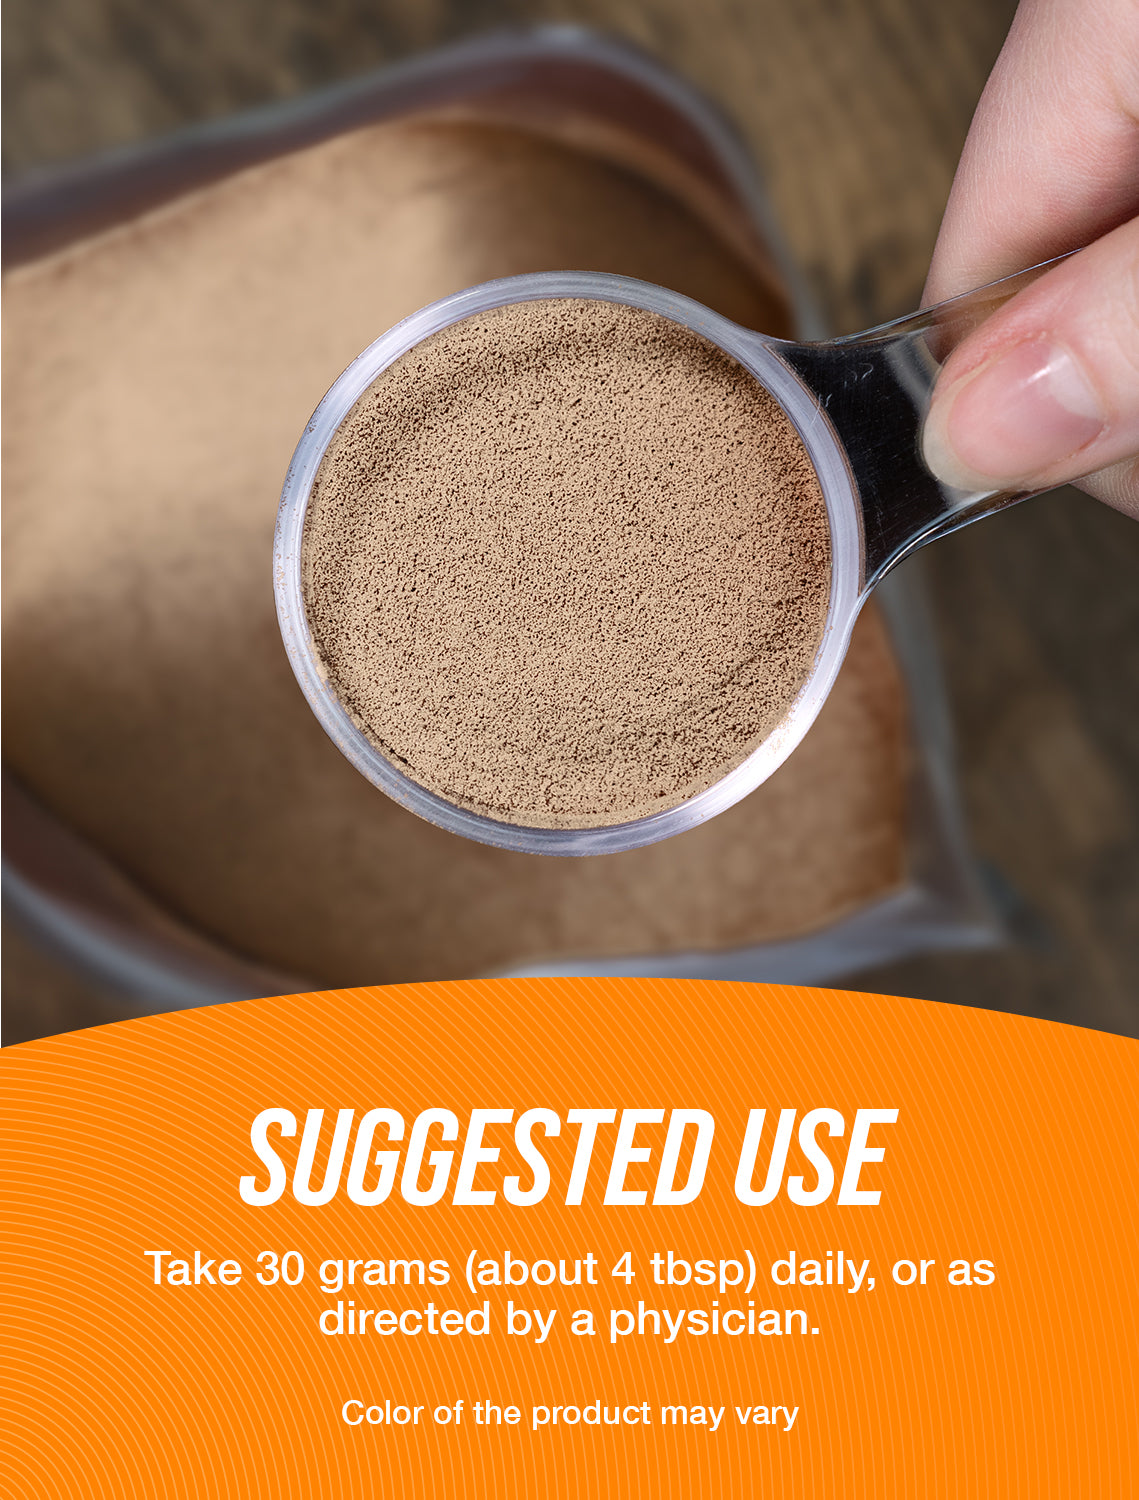 Almond protein powder suggested use image